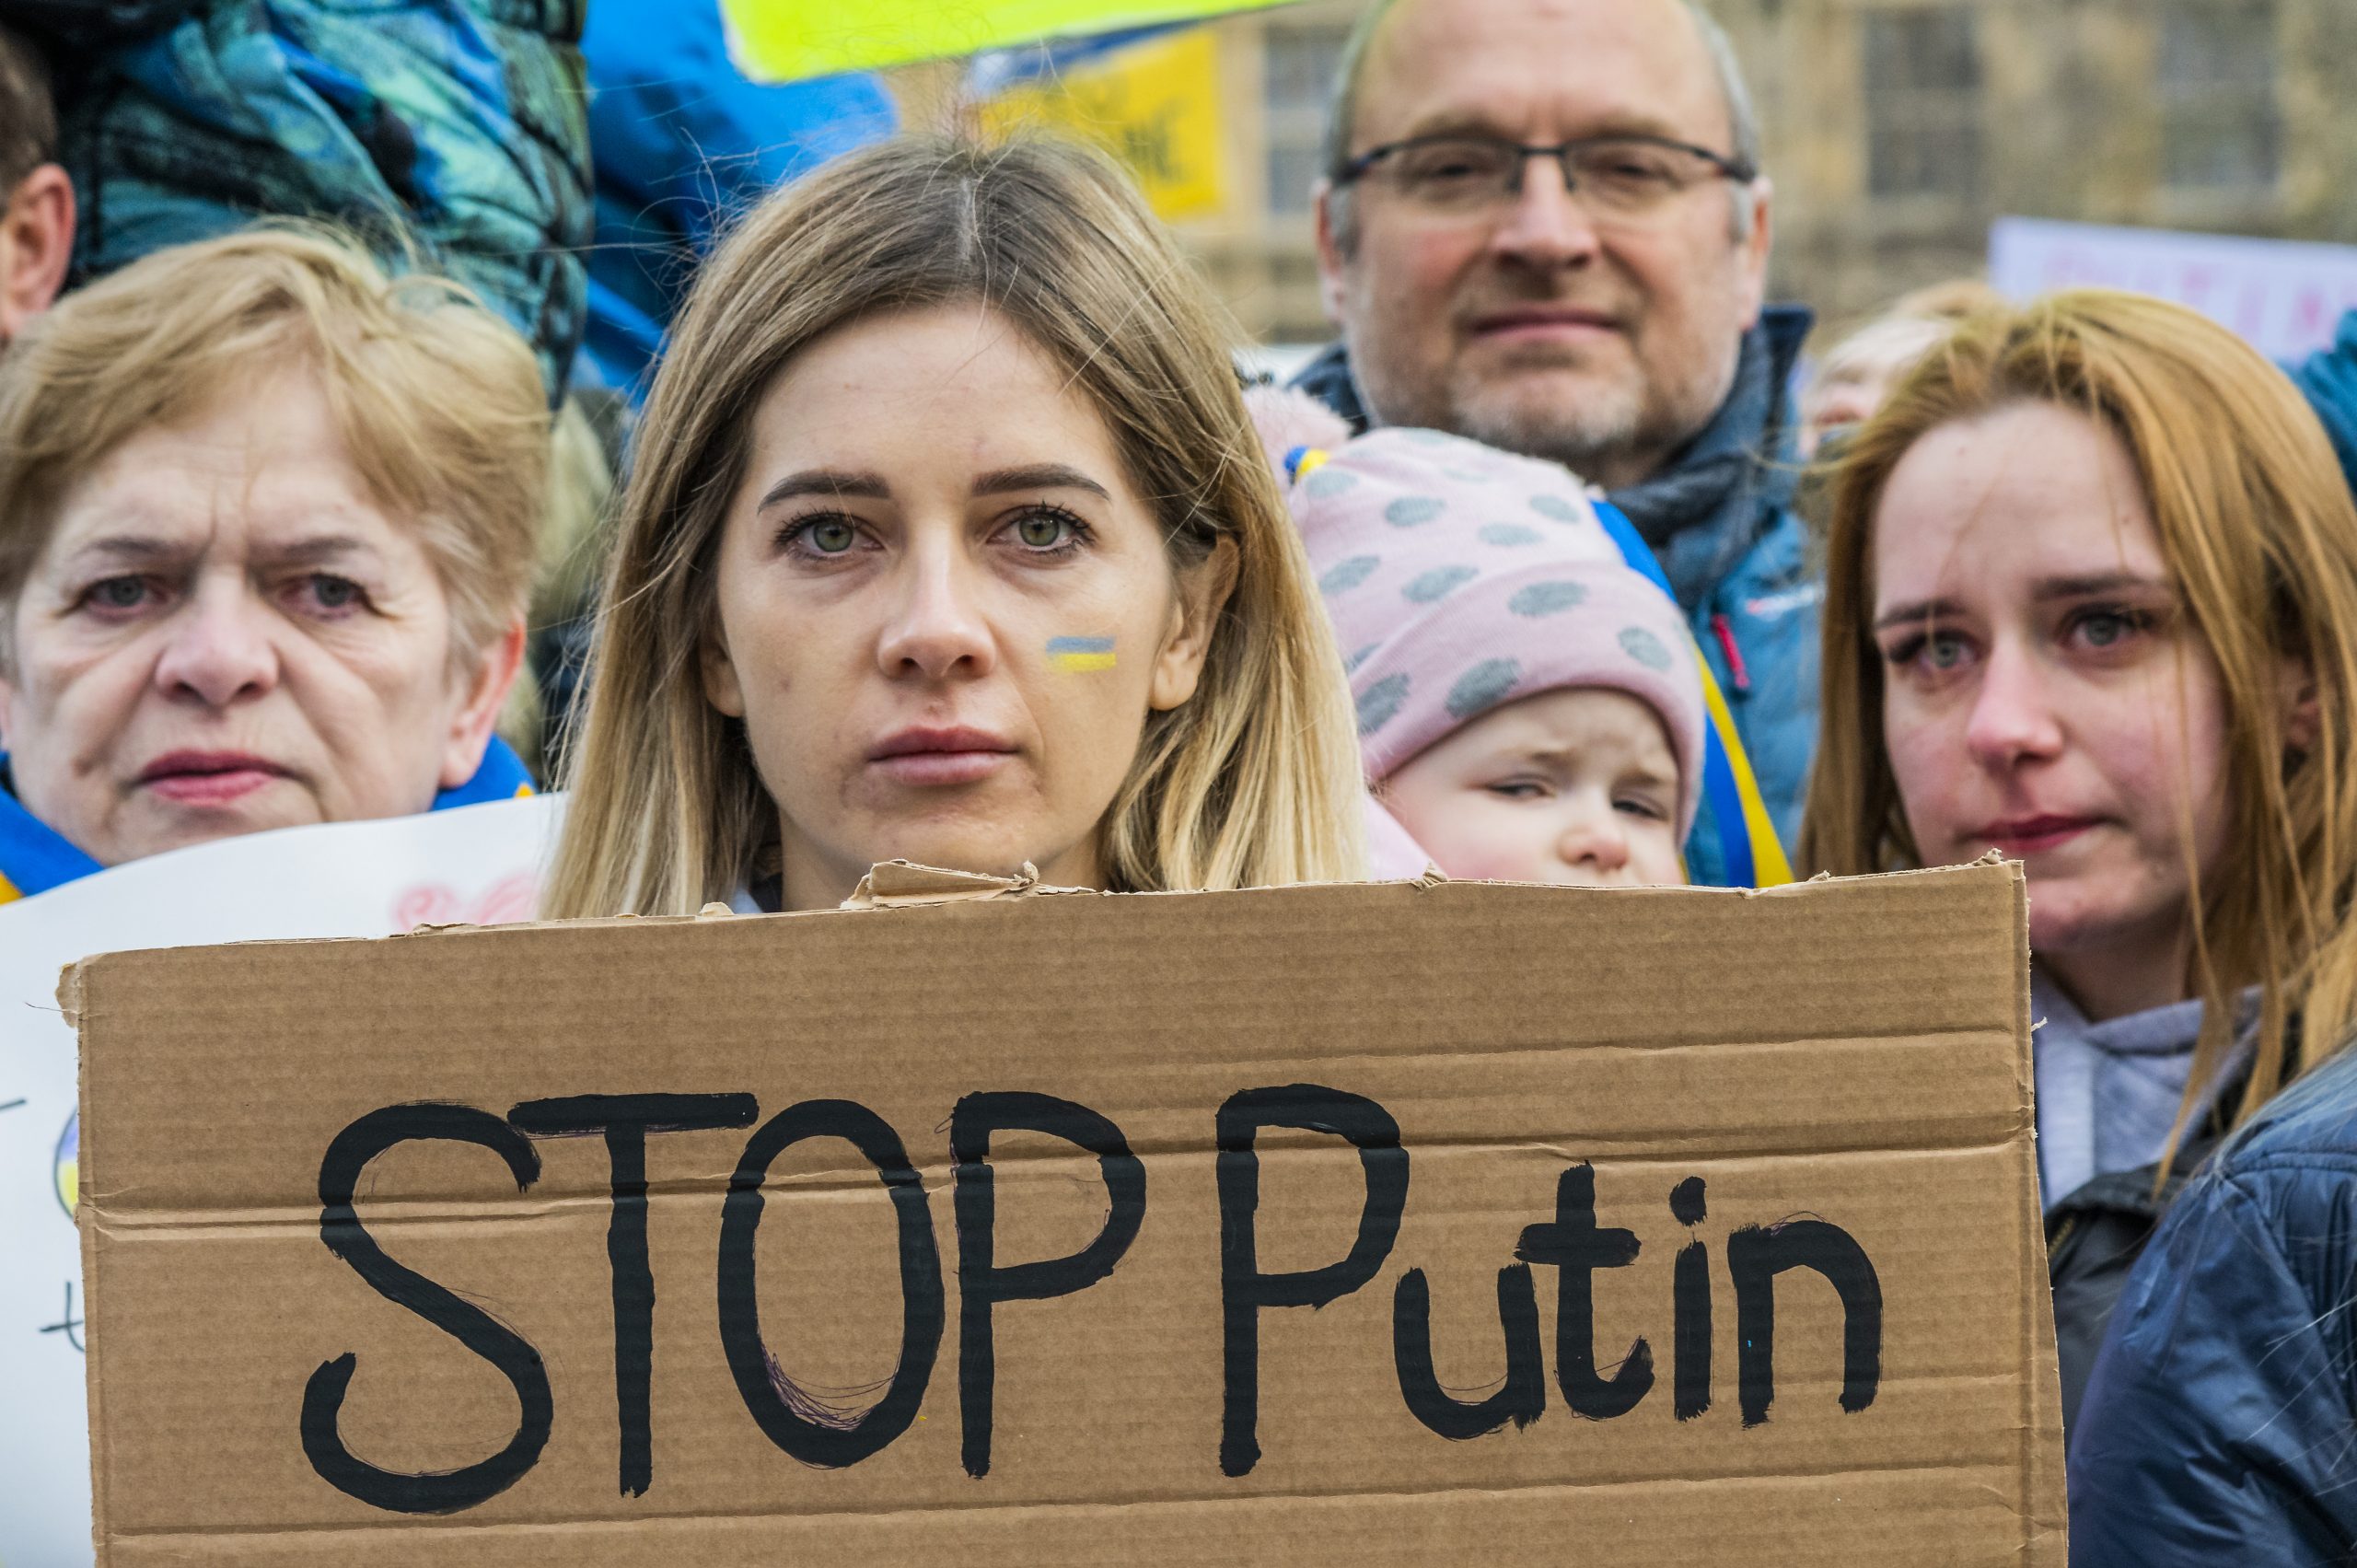 Ukranians and supporters gathered with 'stop Putin' banner